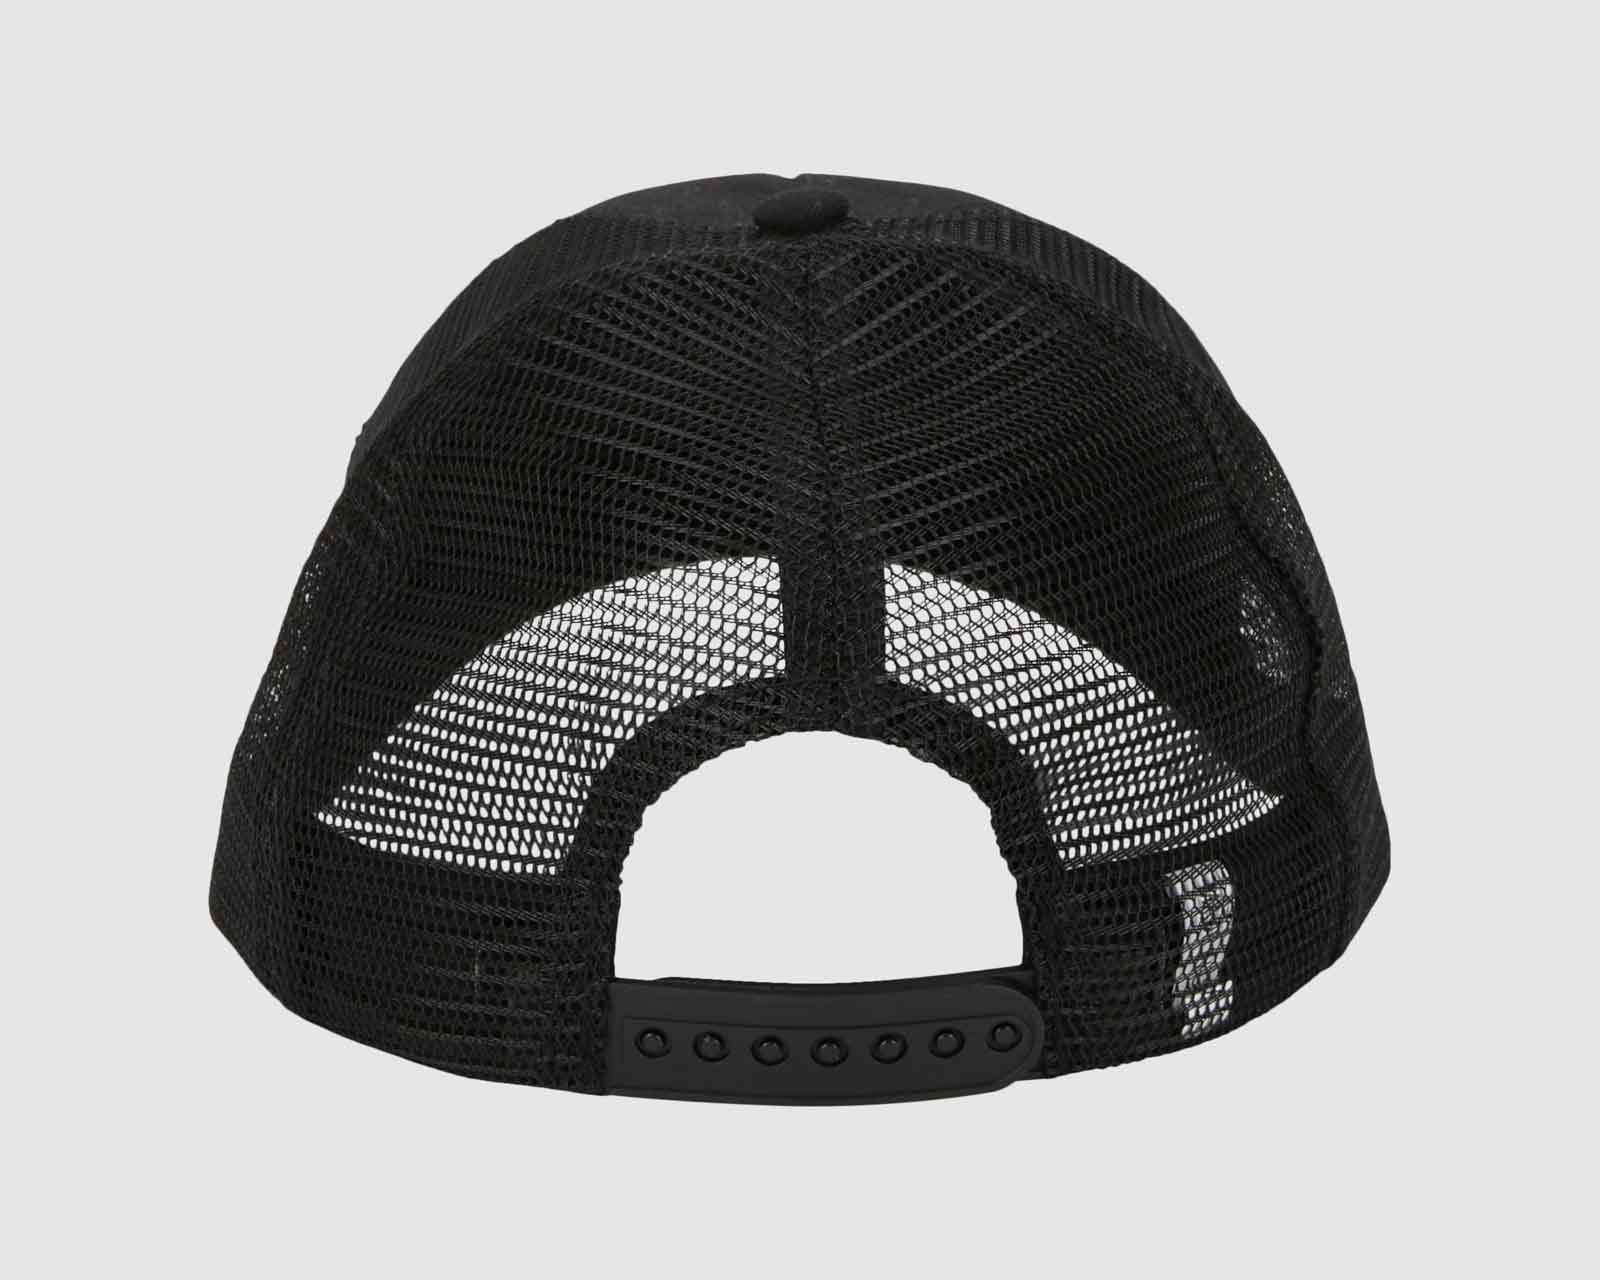 VISION OF SUPER BLACK CAP WITH EMBROIDERED FLAMES